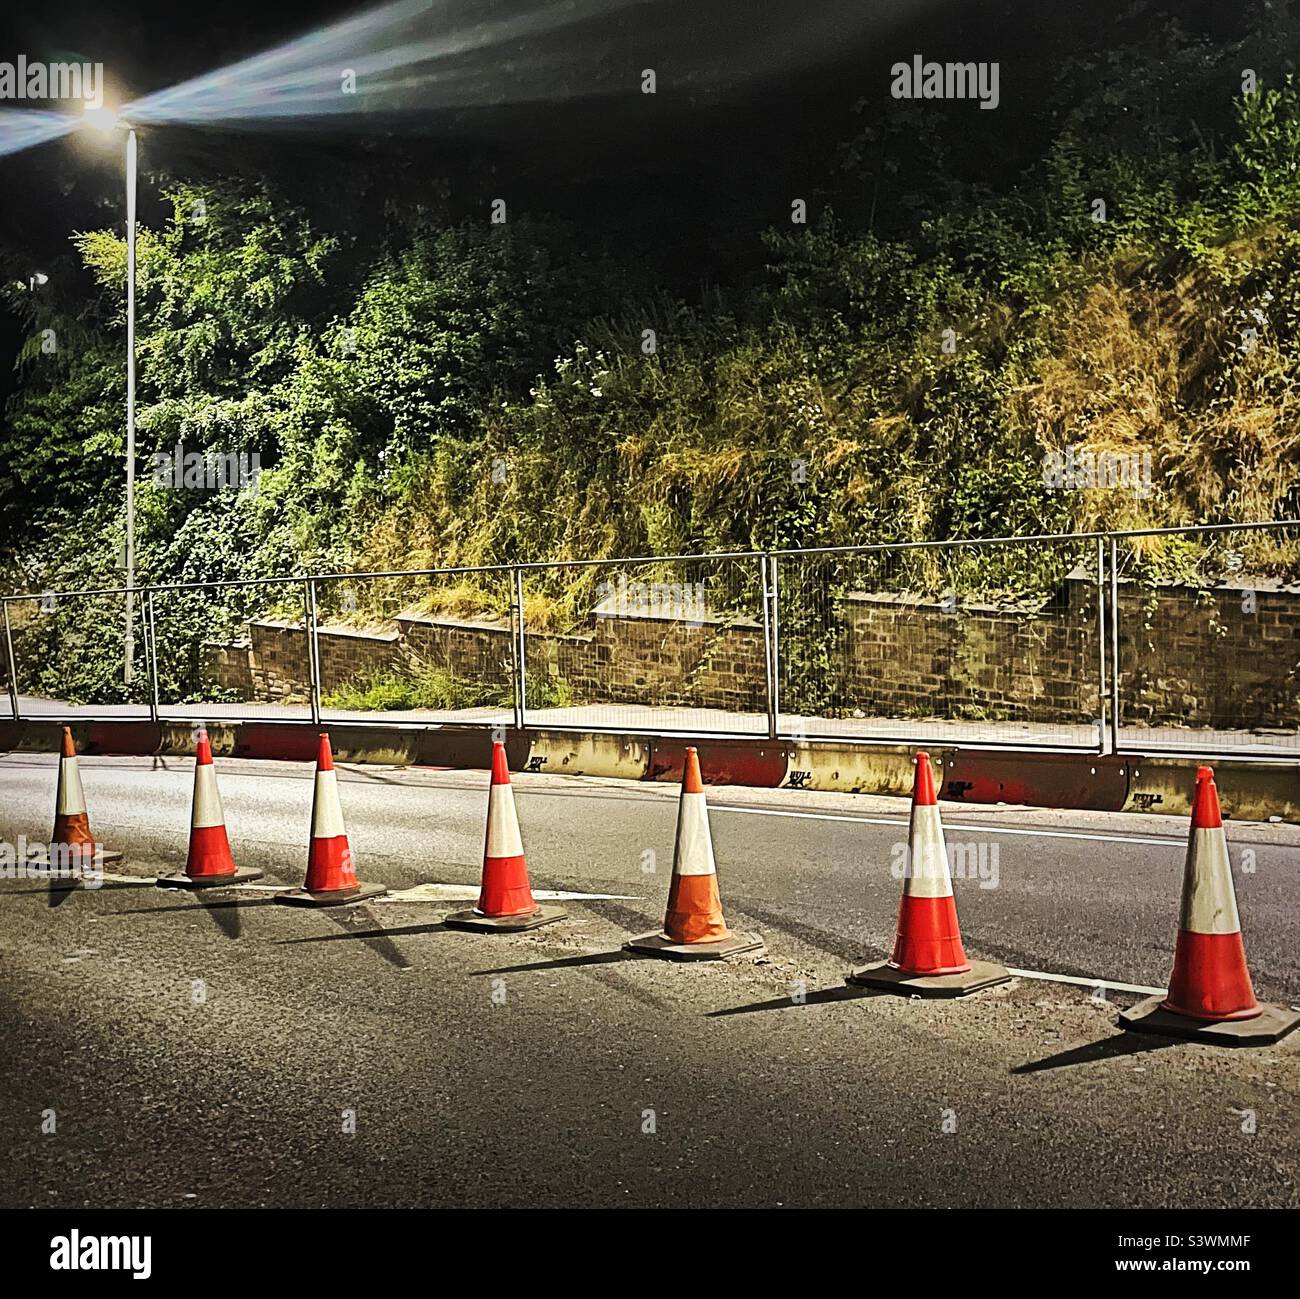 ‘Running Repairs’ roadwork preparation at night as a lane of the road is coned off Stock Photo